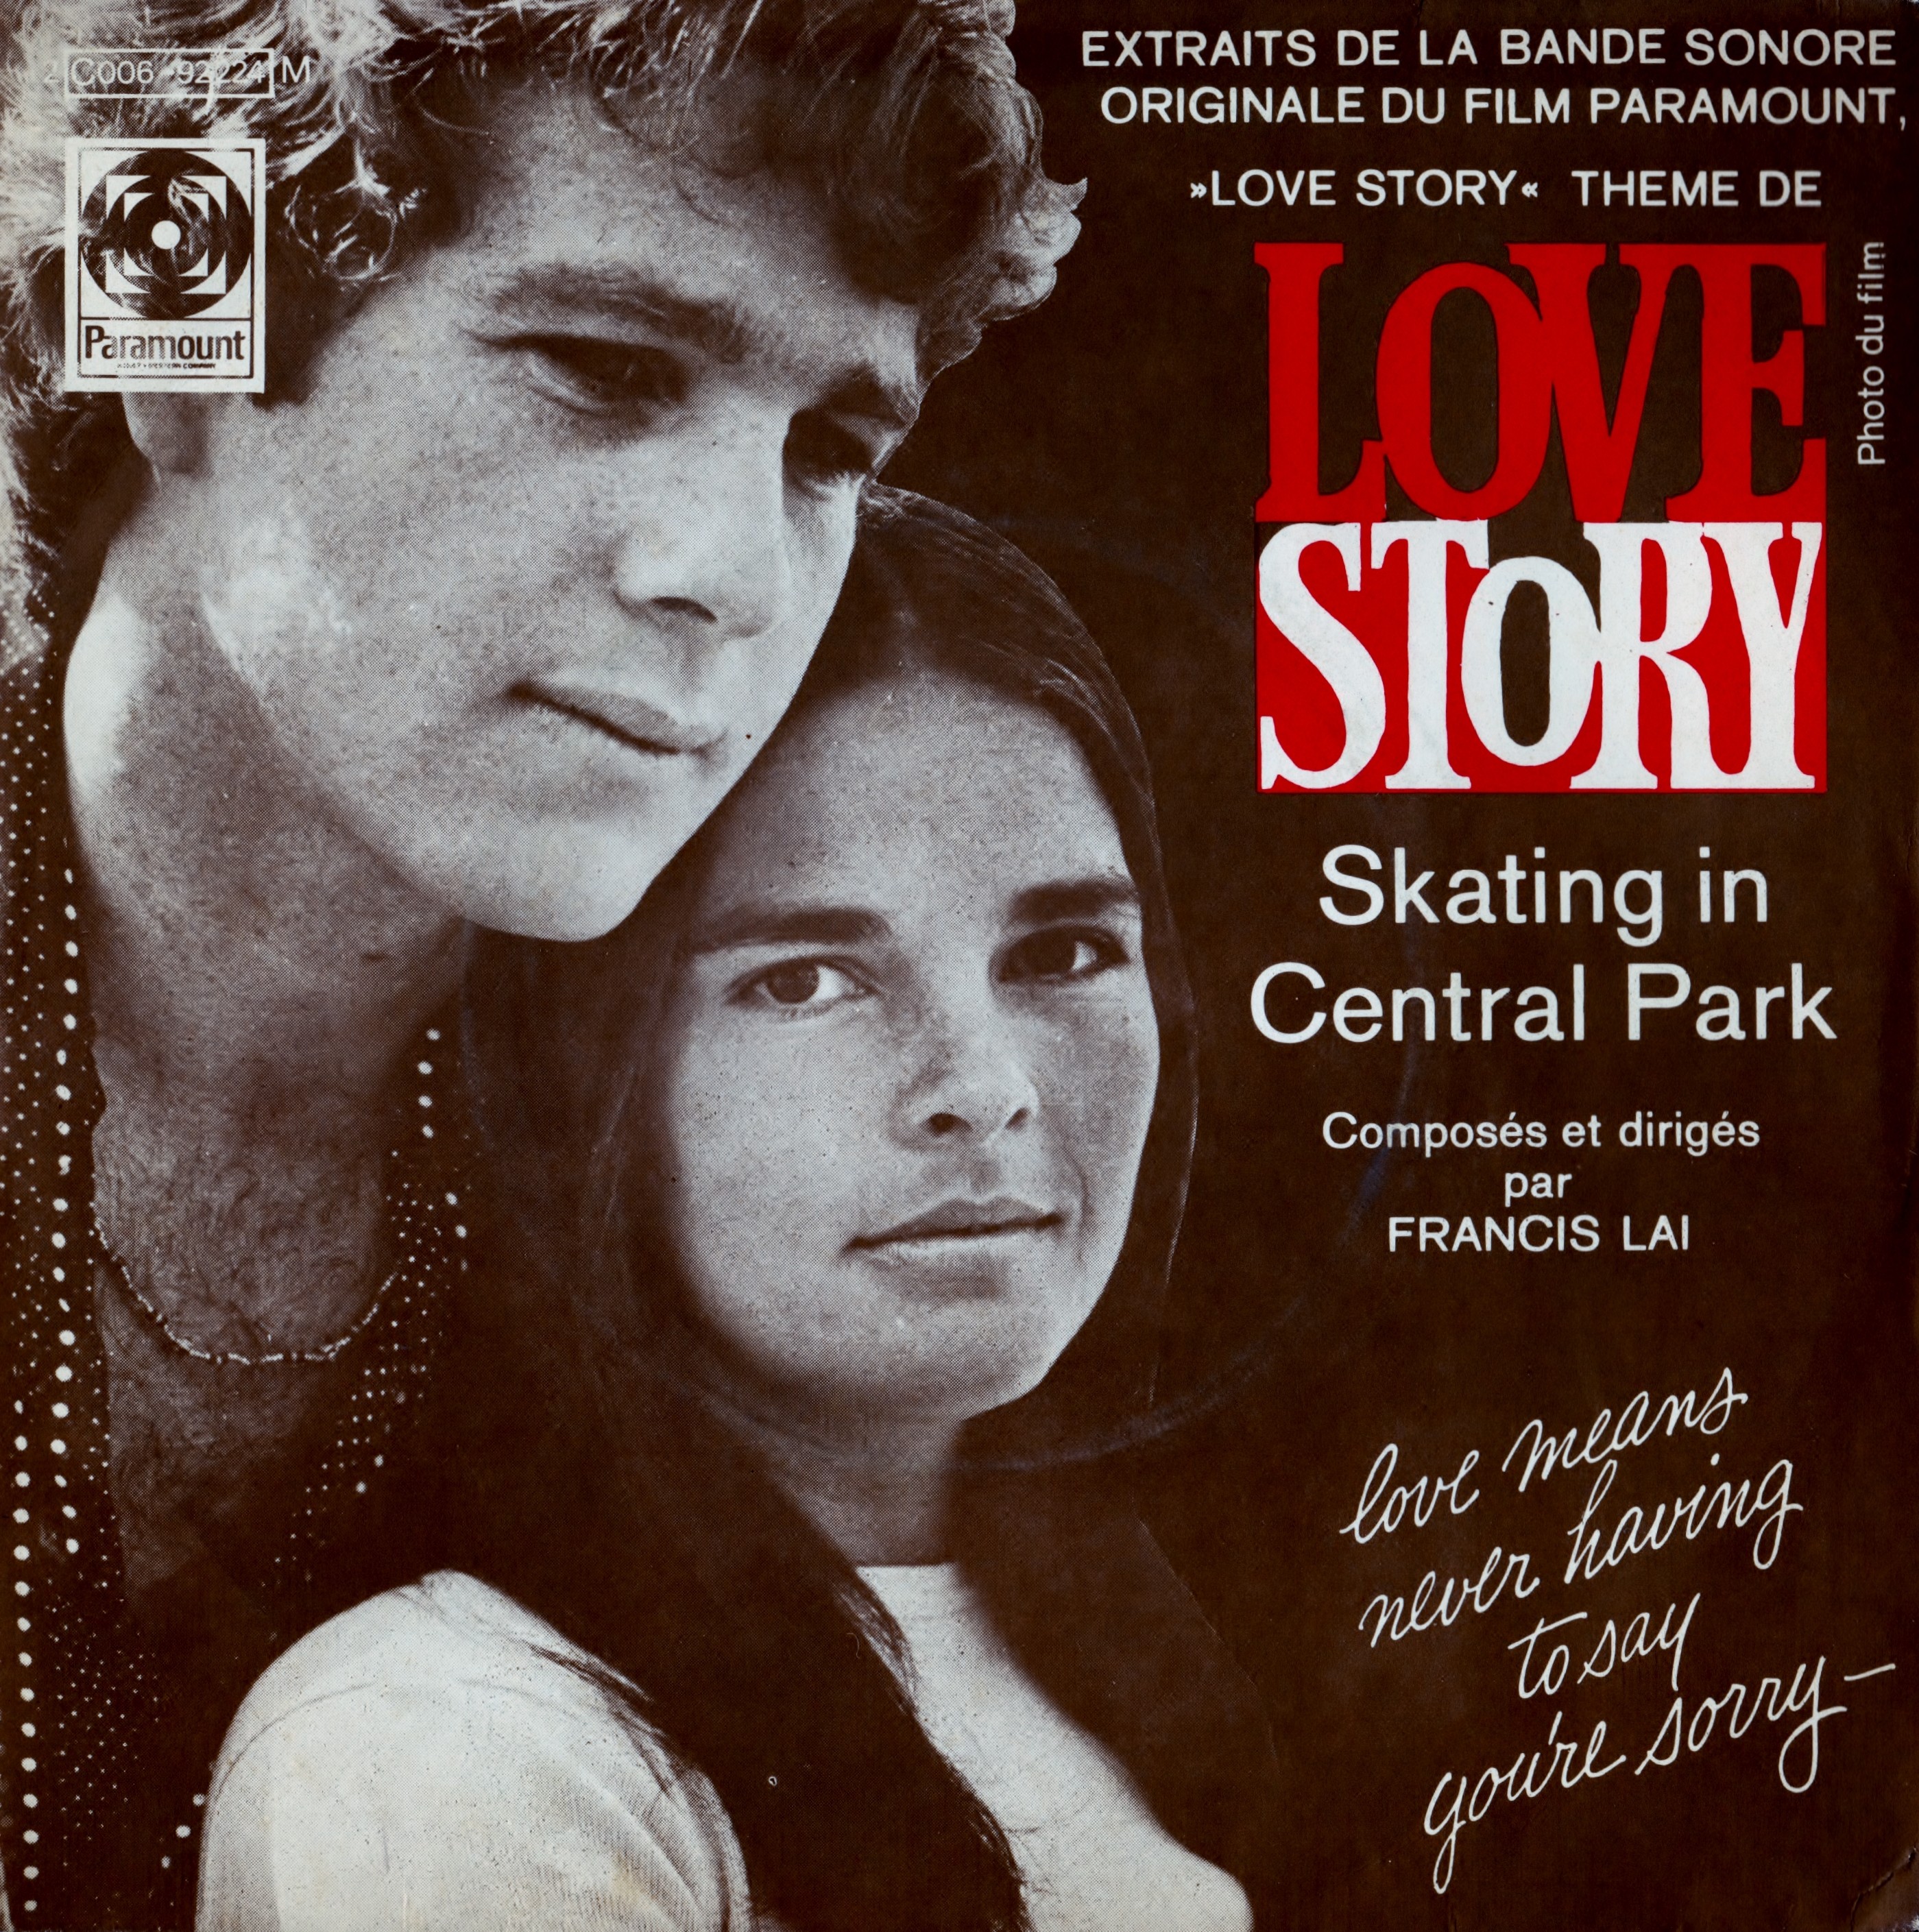 This love story. Love story Фрэнсис. Love story lai 1970. Love story Francis lai. История любви.